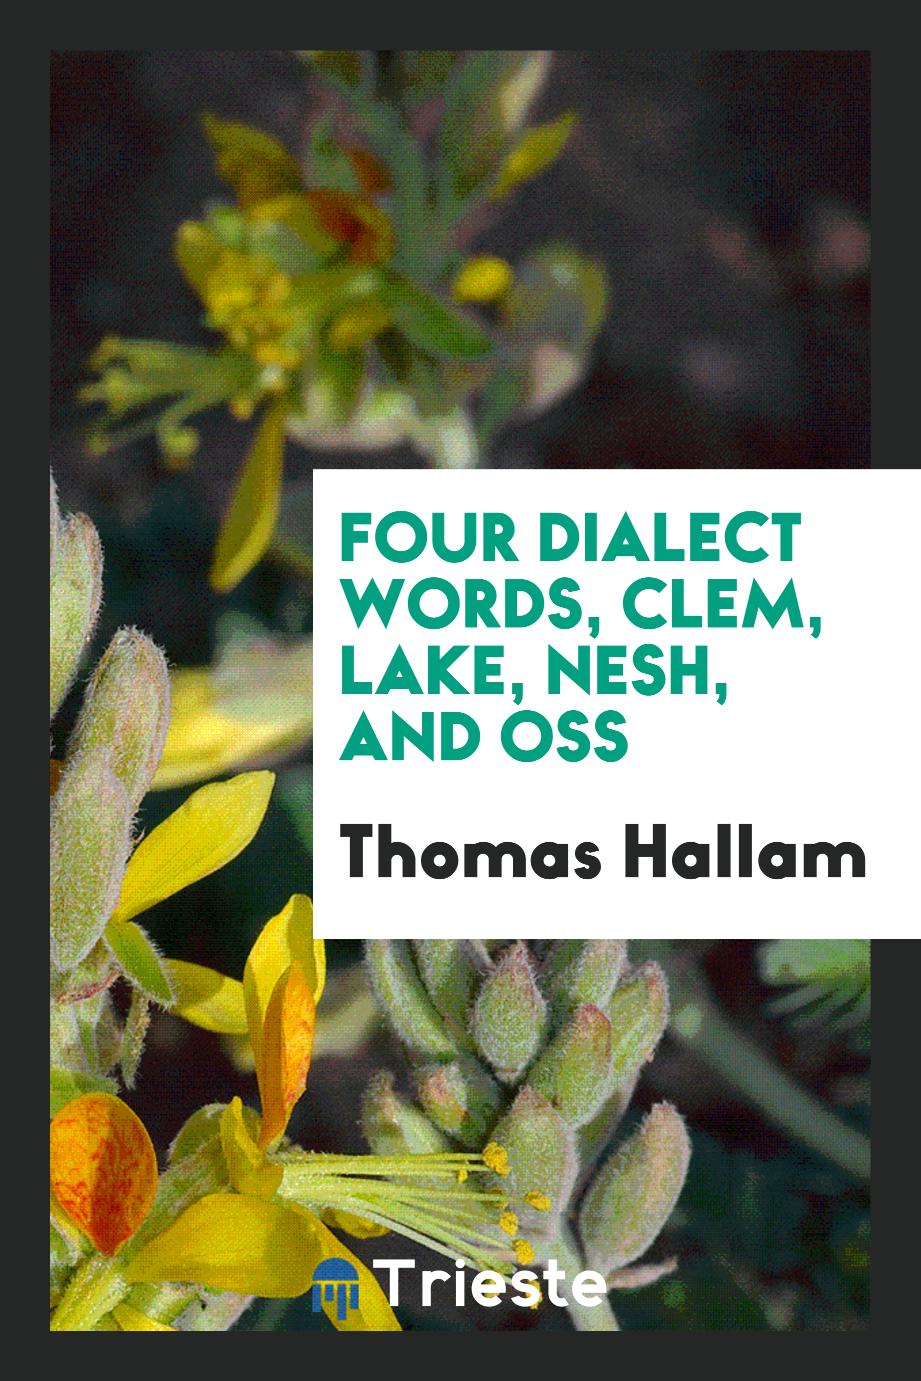 Four dialect words, clem, lake, nesh, and oss